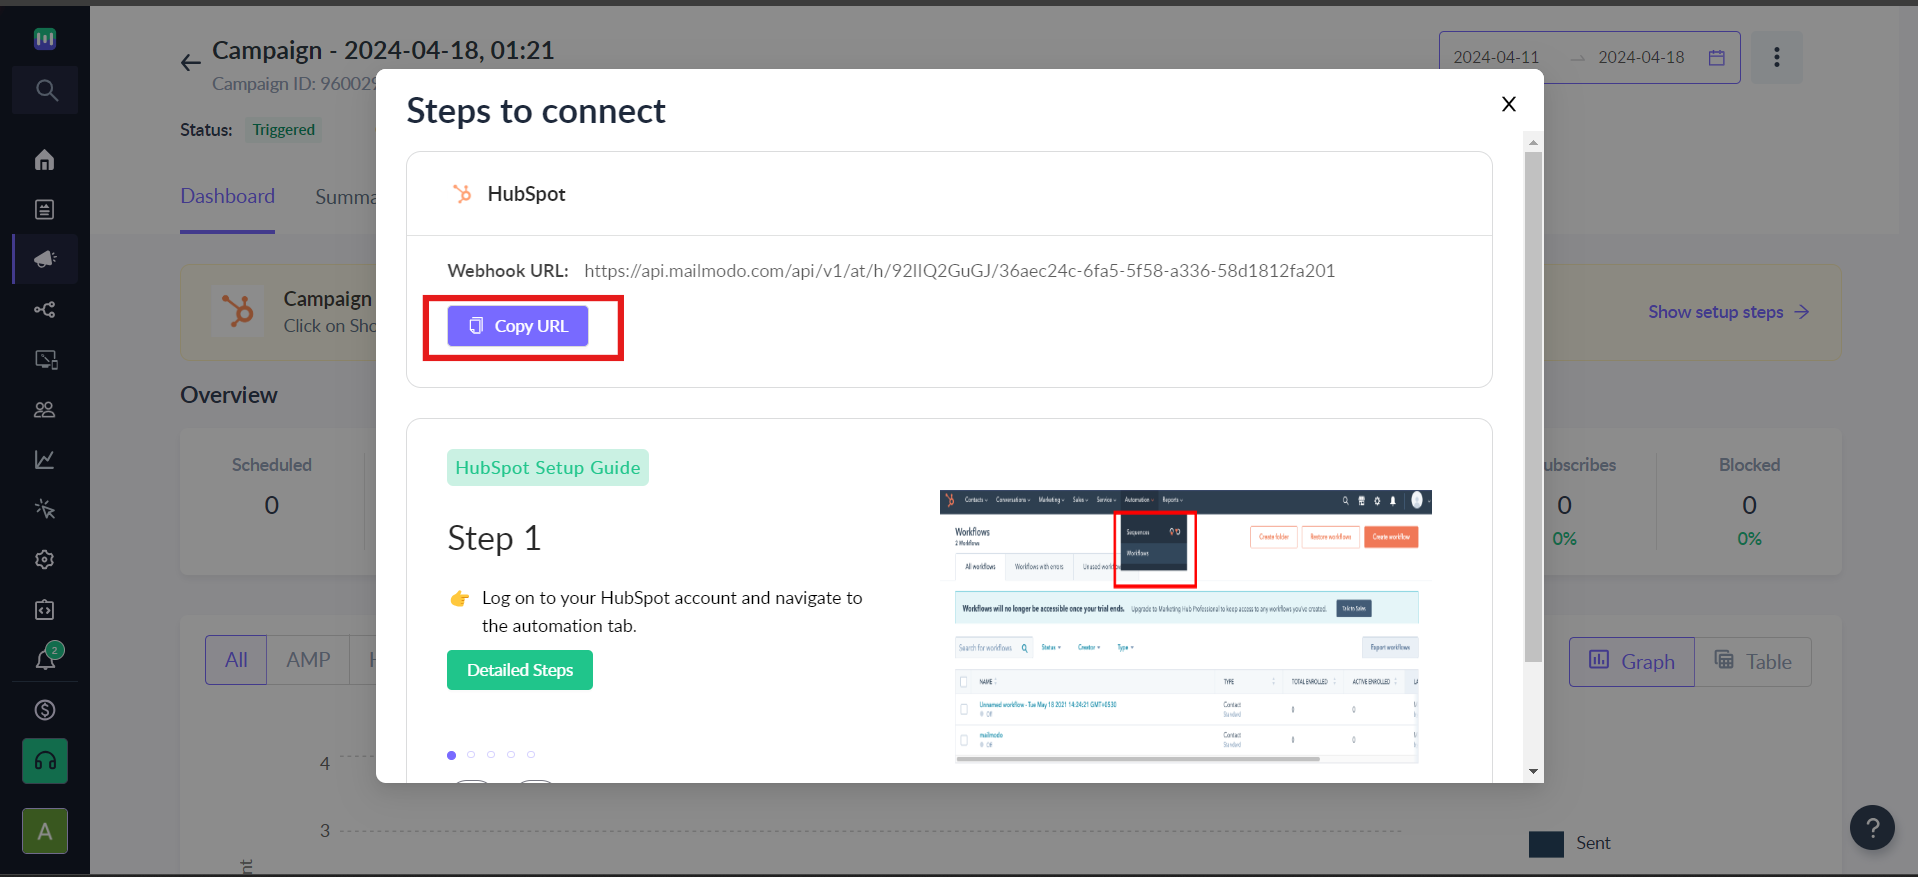 How to trigger emails in Mailmodo through HubSpot